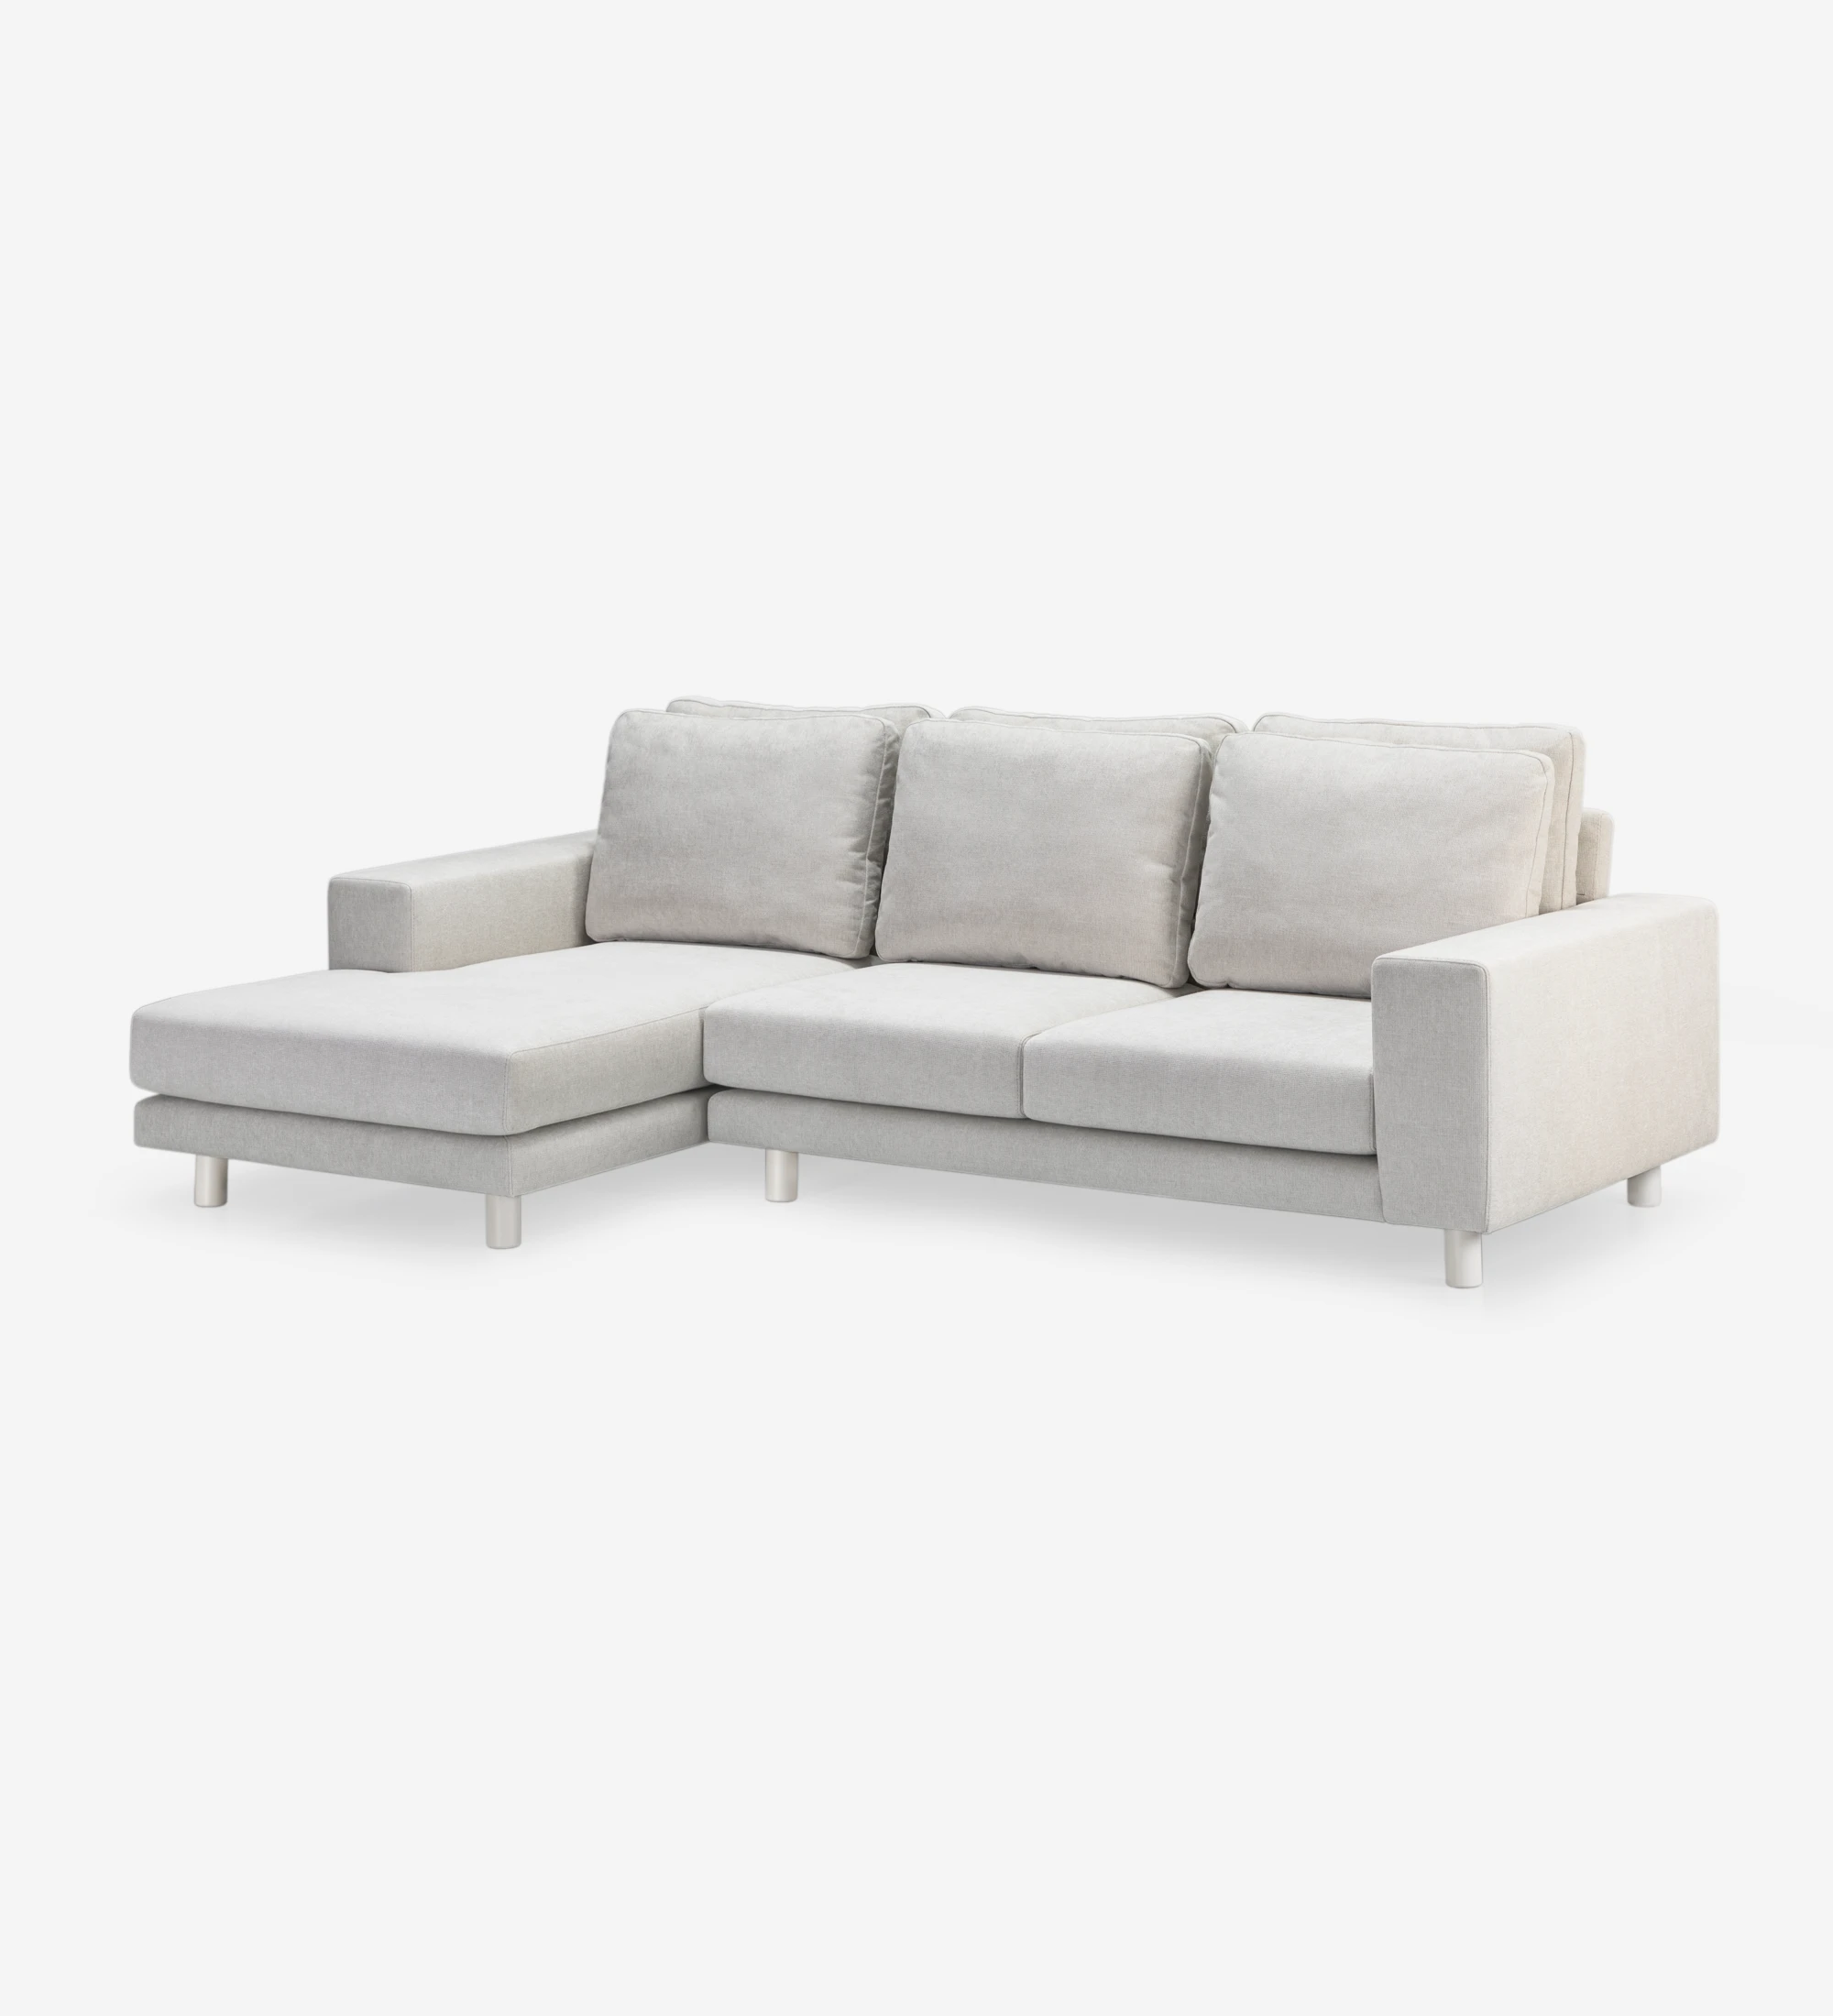 Dallas 2-seater sofa and left chaise longue, upholstered in beige fabric, folding back cushions, pearl lacquered feet, 273 cm.